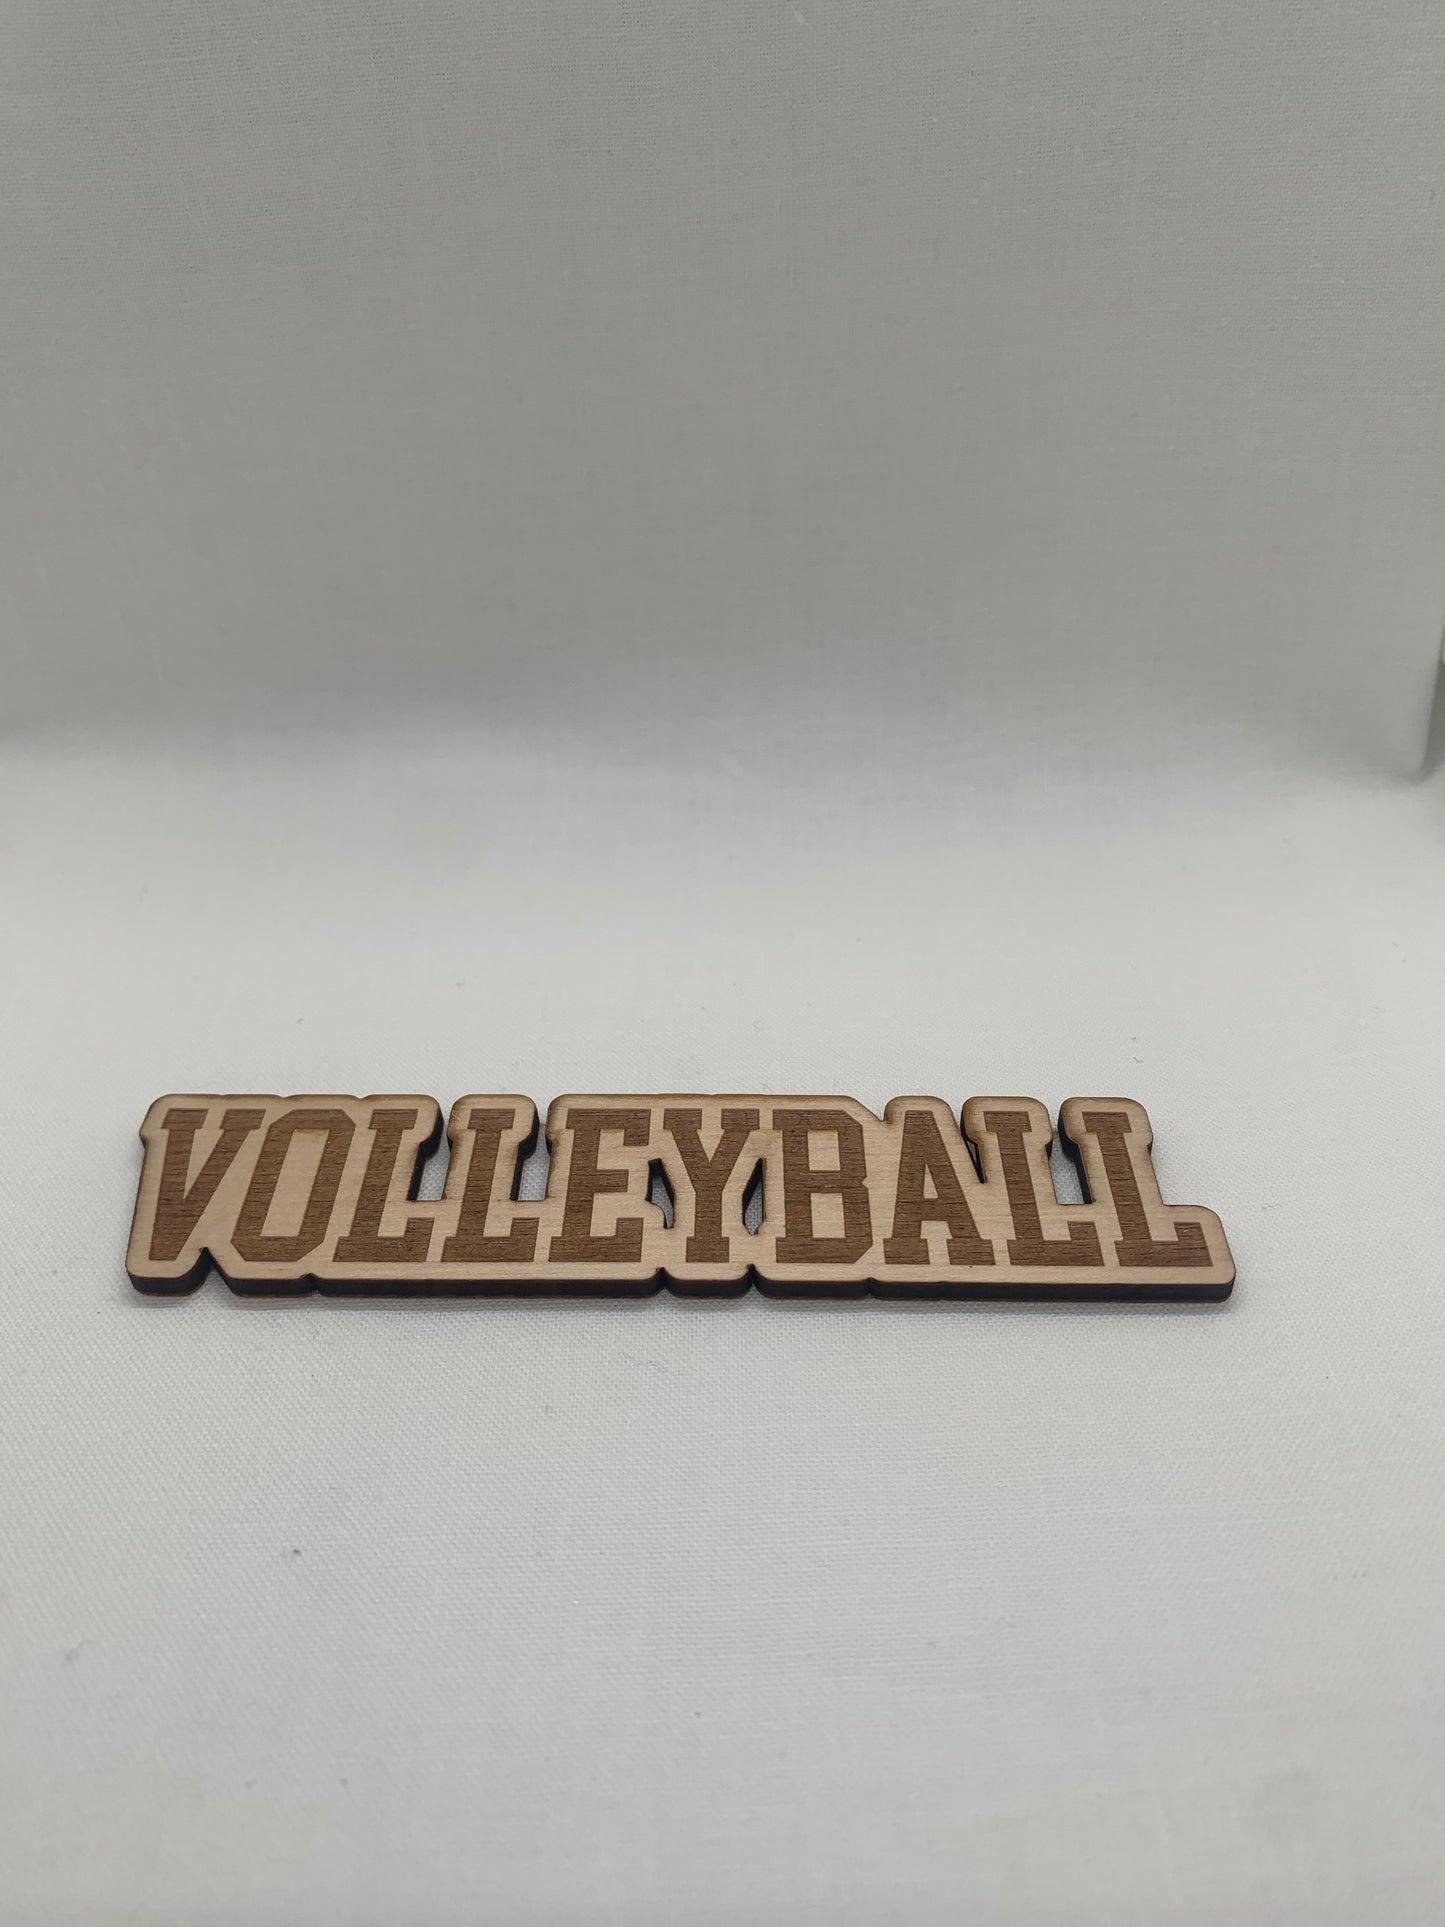 Volleyball title - Creative Designs By Kari